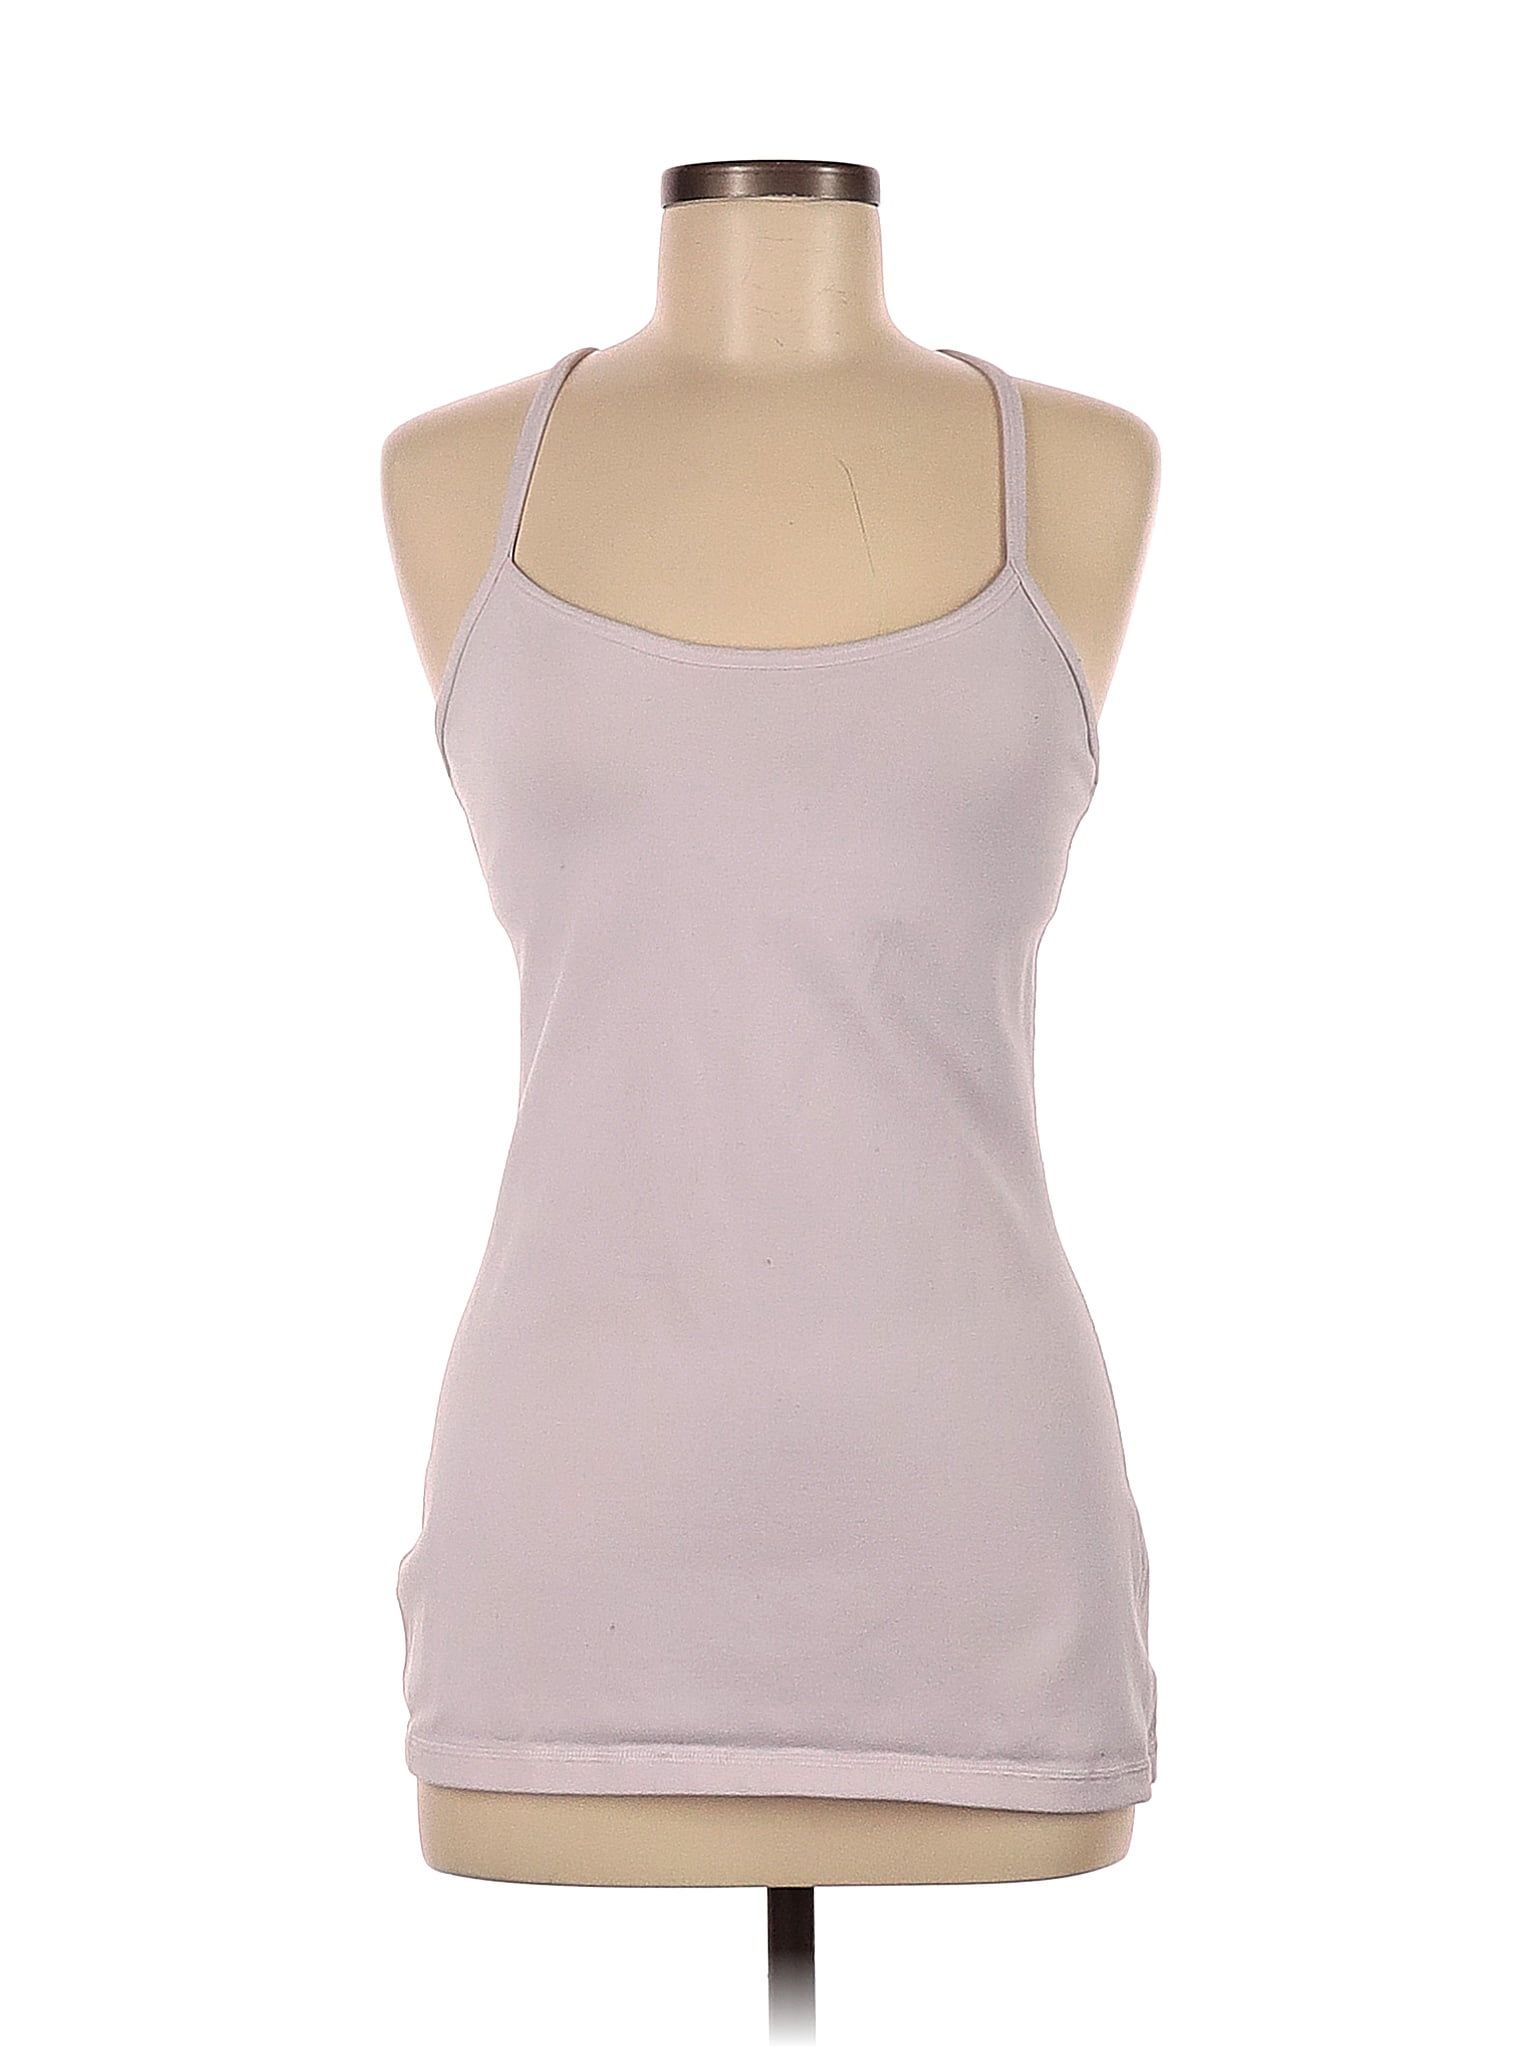 Pre-Owned Lululemon Athletica Womens Size 8 Active Palestine